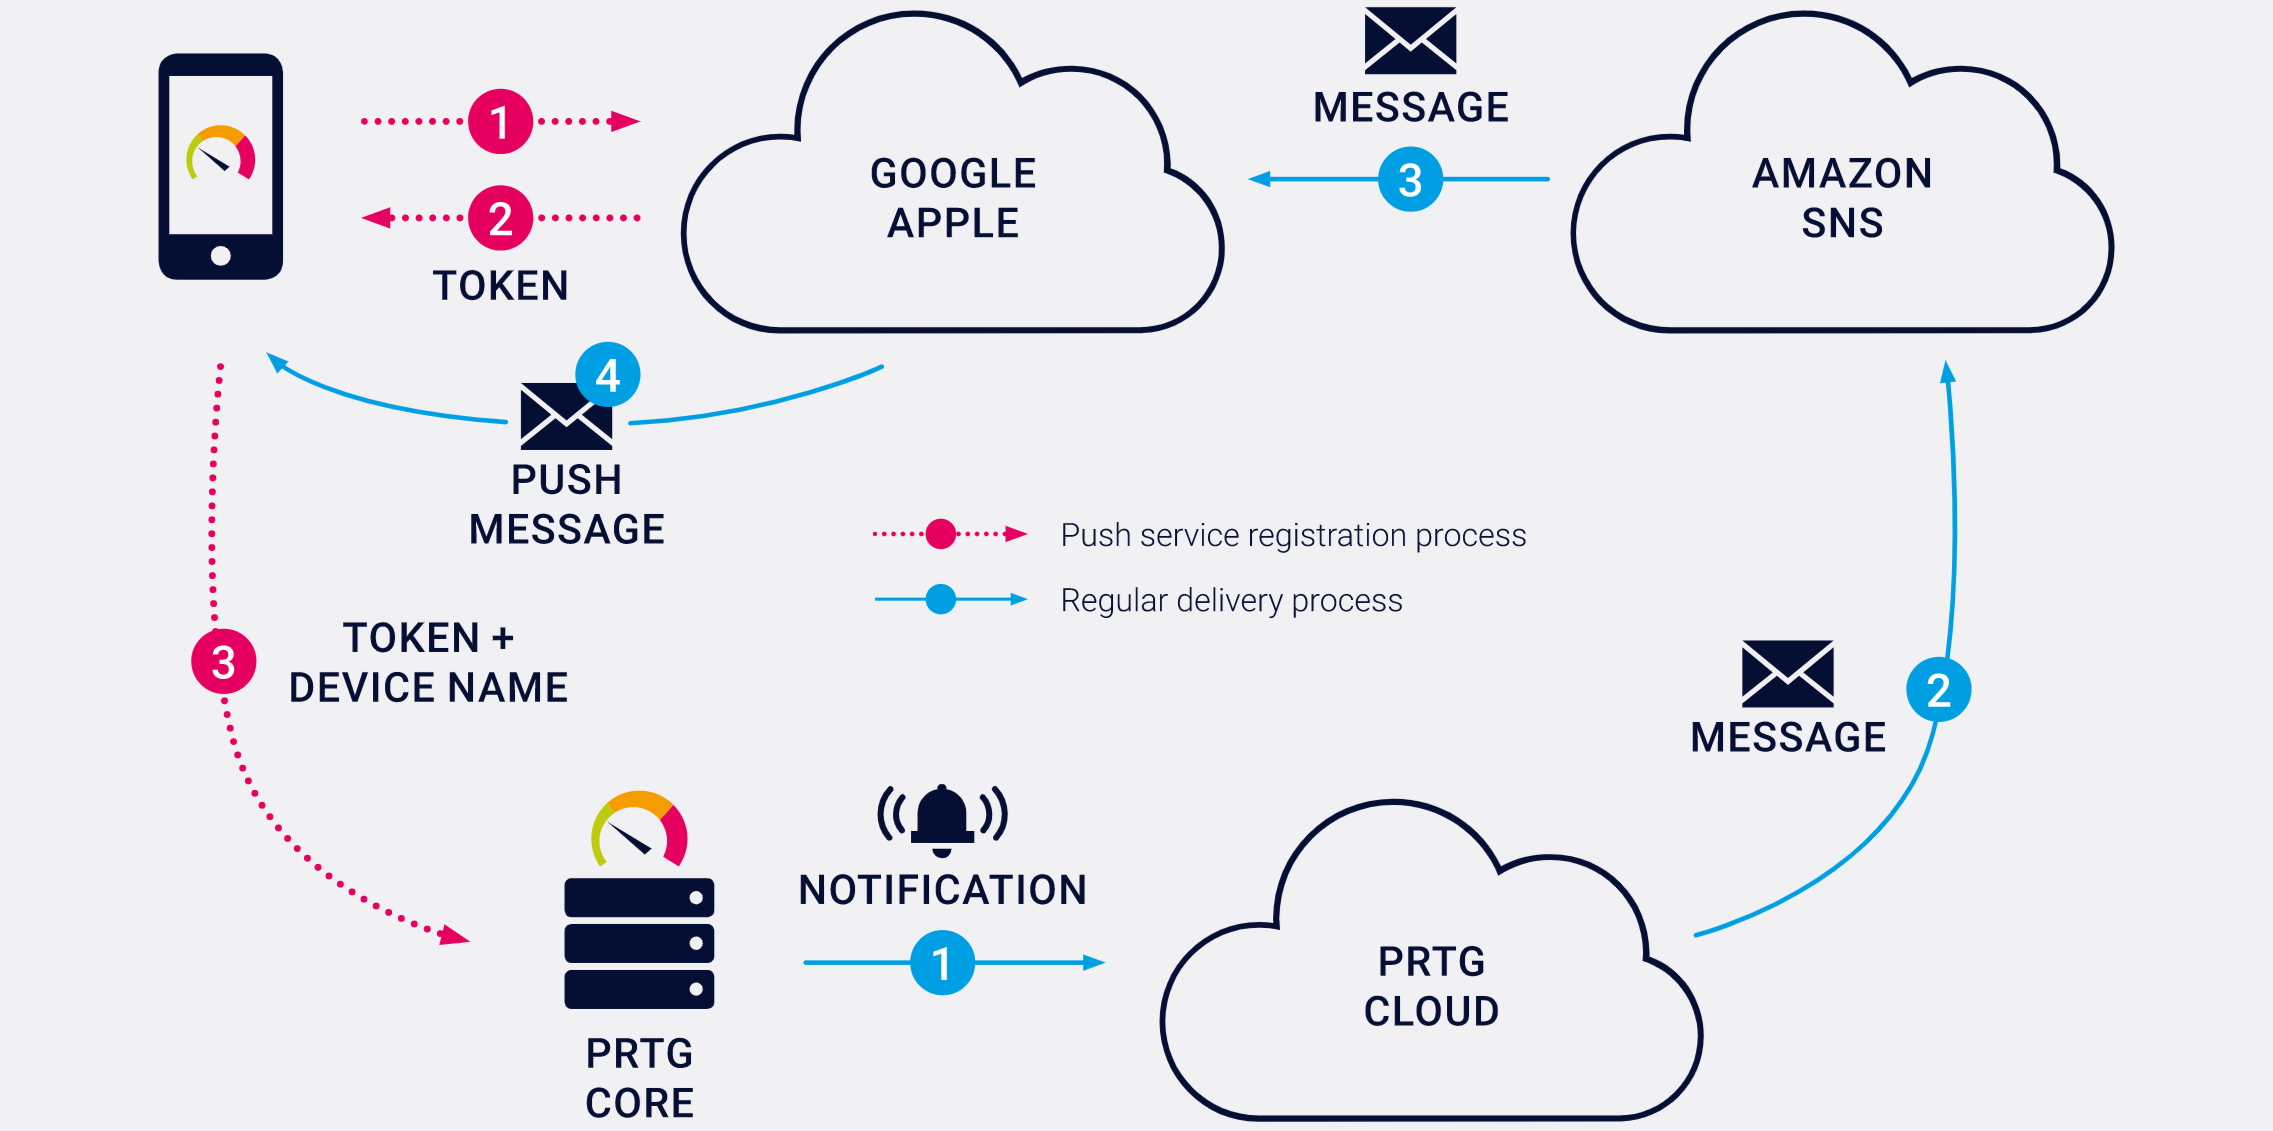 How push notifications work in PRTG